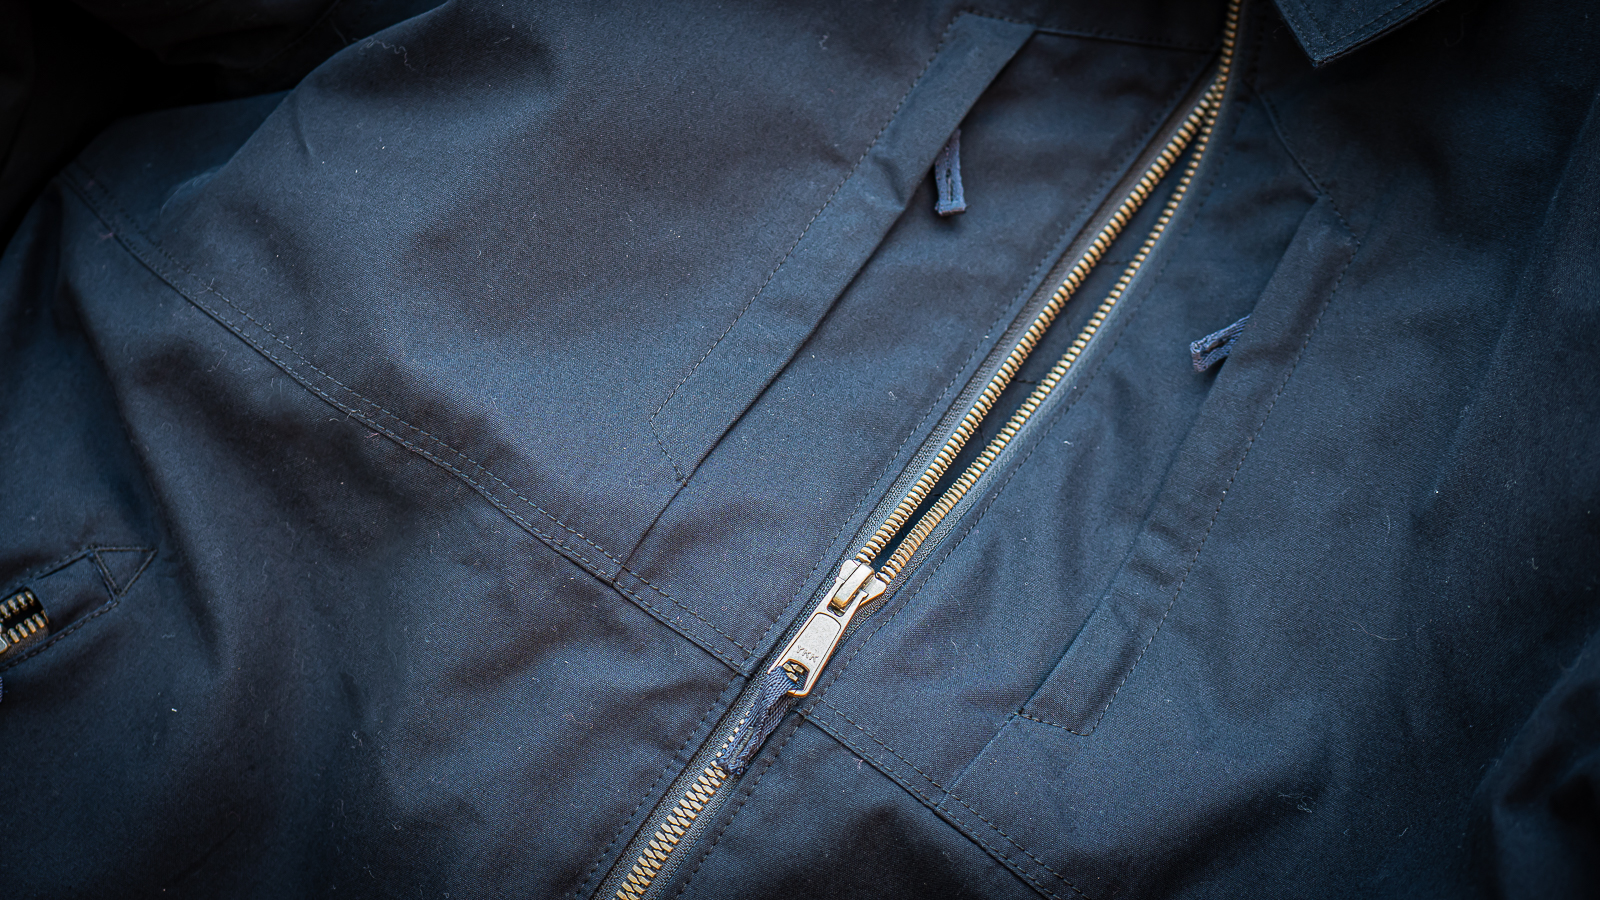 LIVSN Launches Zero-Synthetic Insulated Jacket